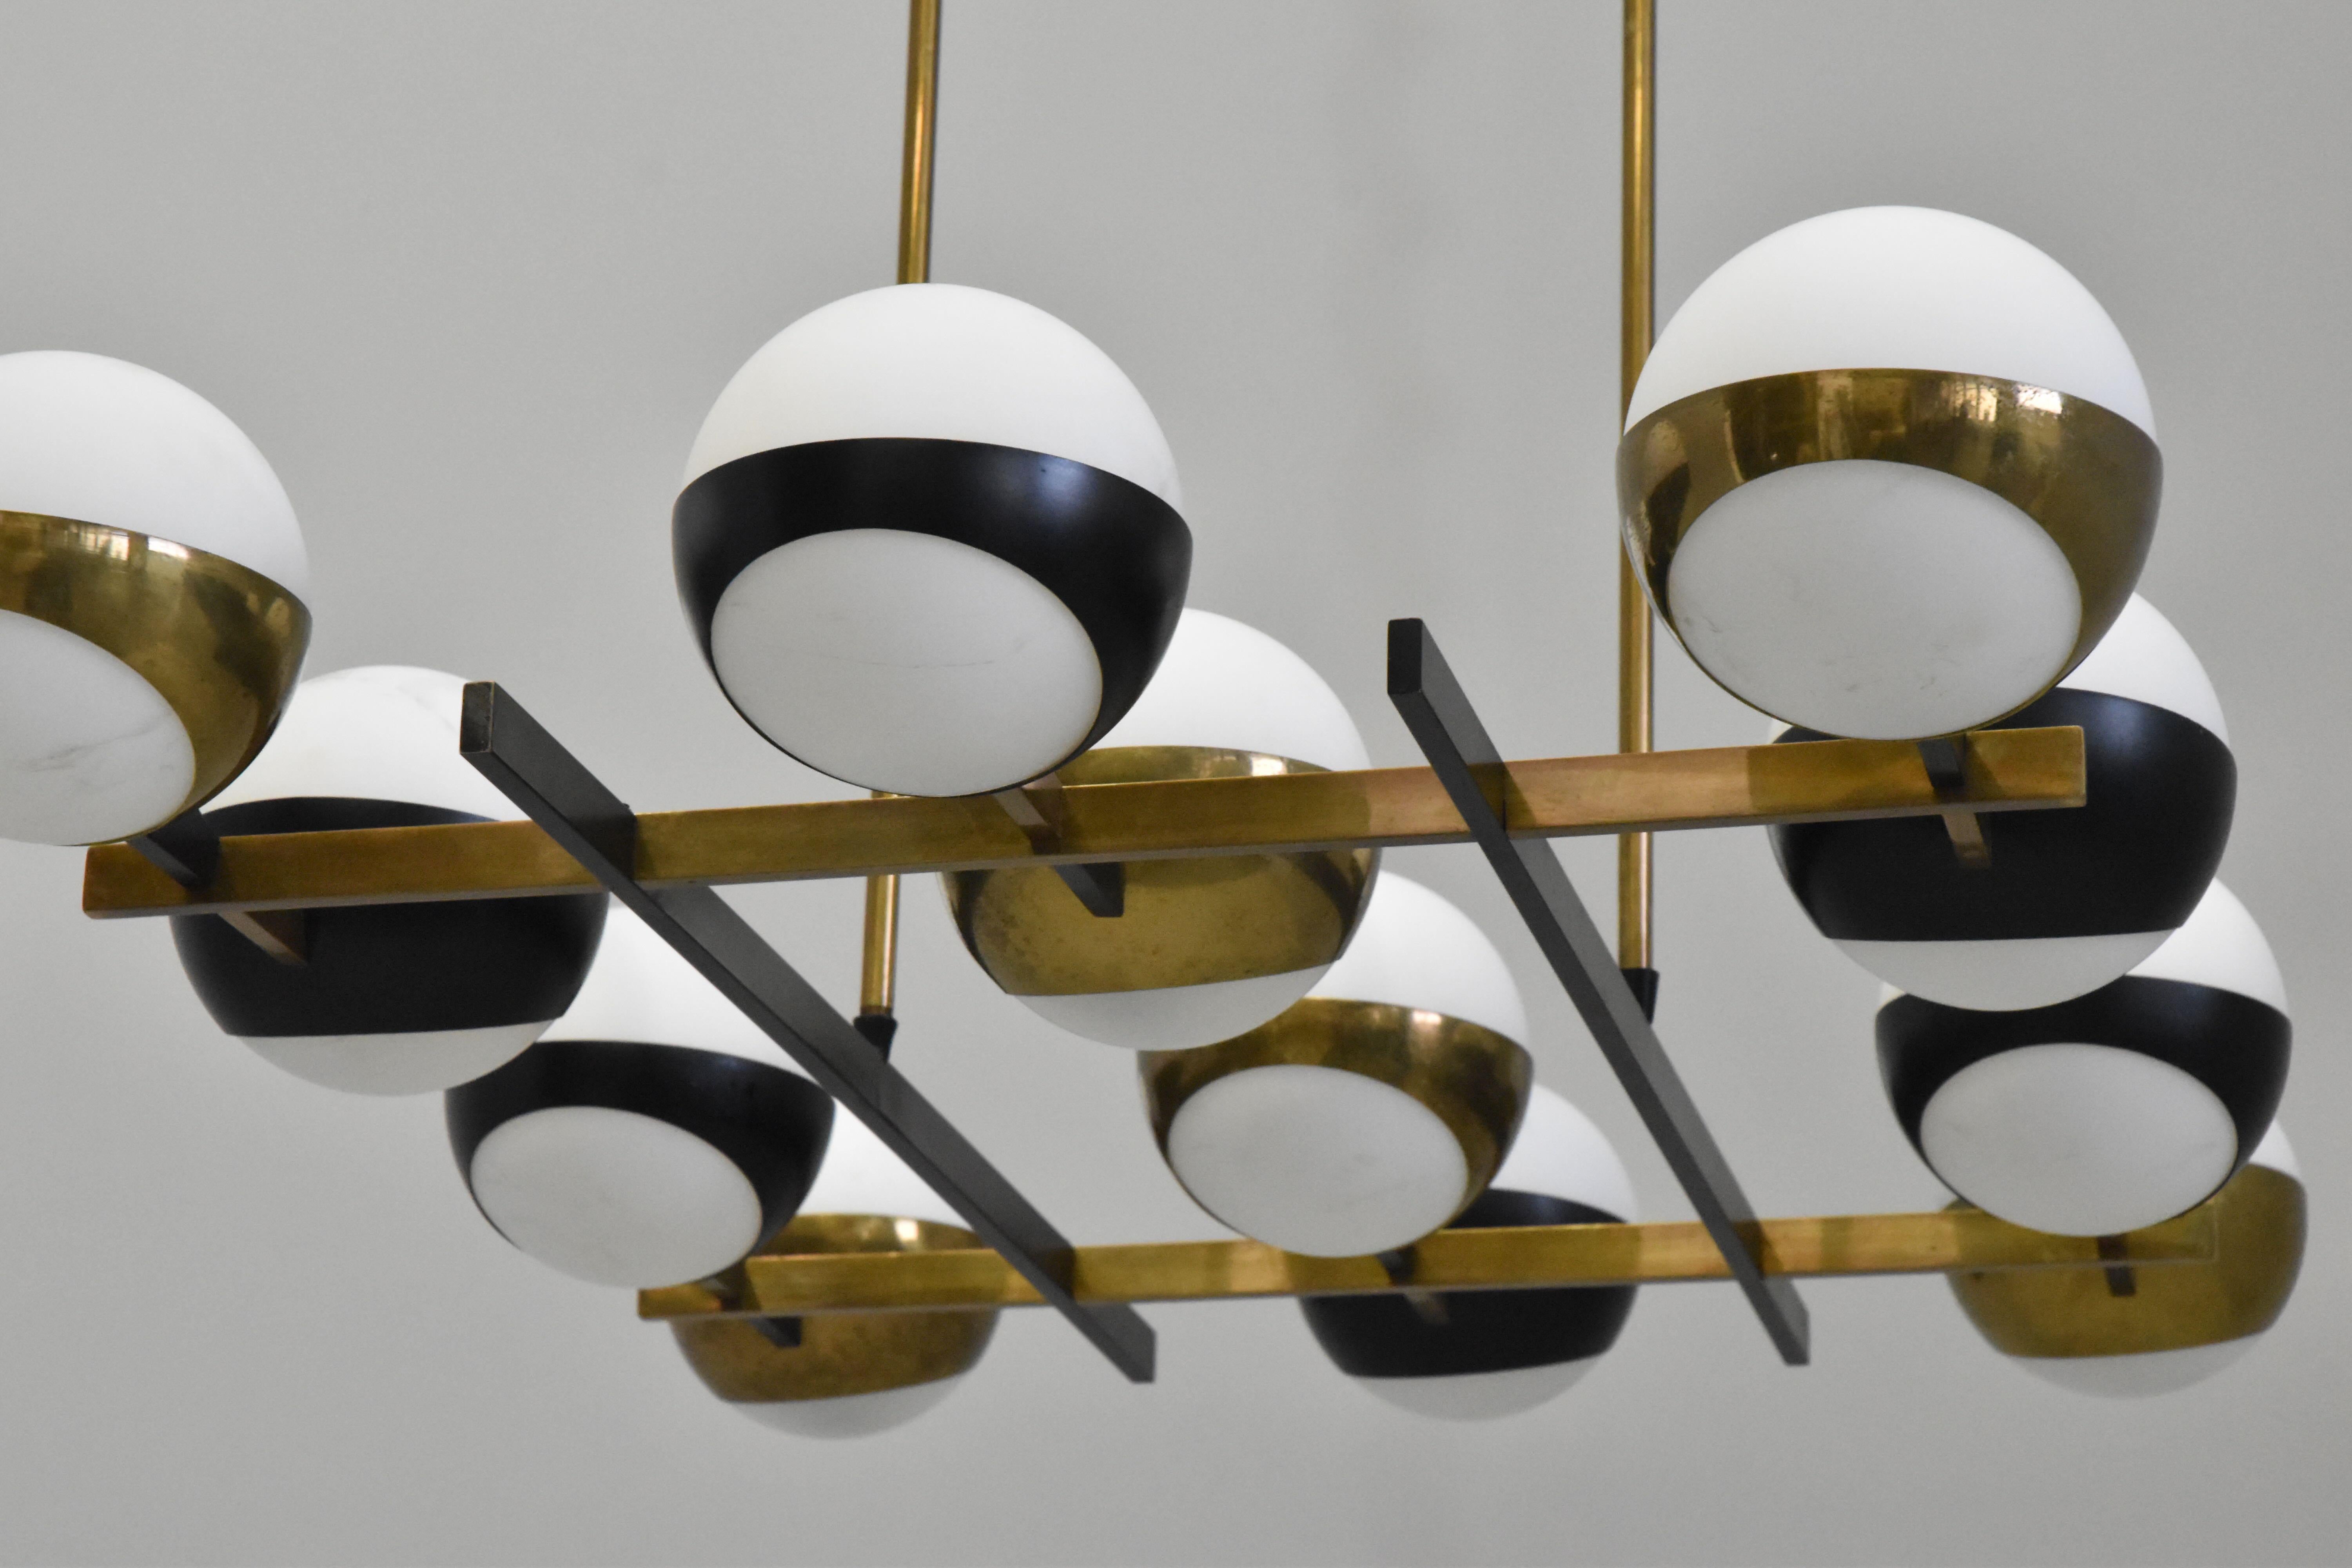 Monumental 1950s 12-Globe Glass & Metal Chandelier for Stilnovo.
 
Executed in 12 opaline glass globes, brass and black enameled metal. An iconic Italian light sculpture of impressive scale and incomparable refinement. Sourced from an estate in